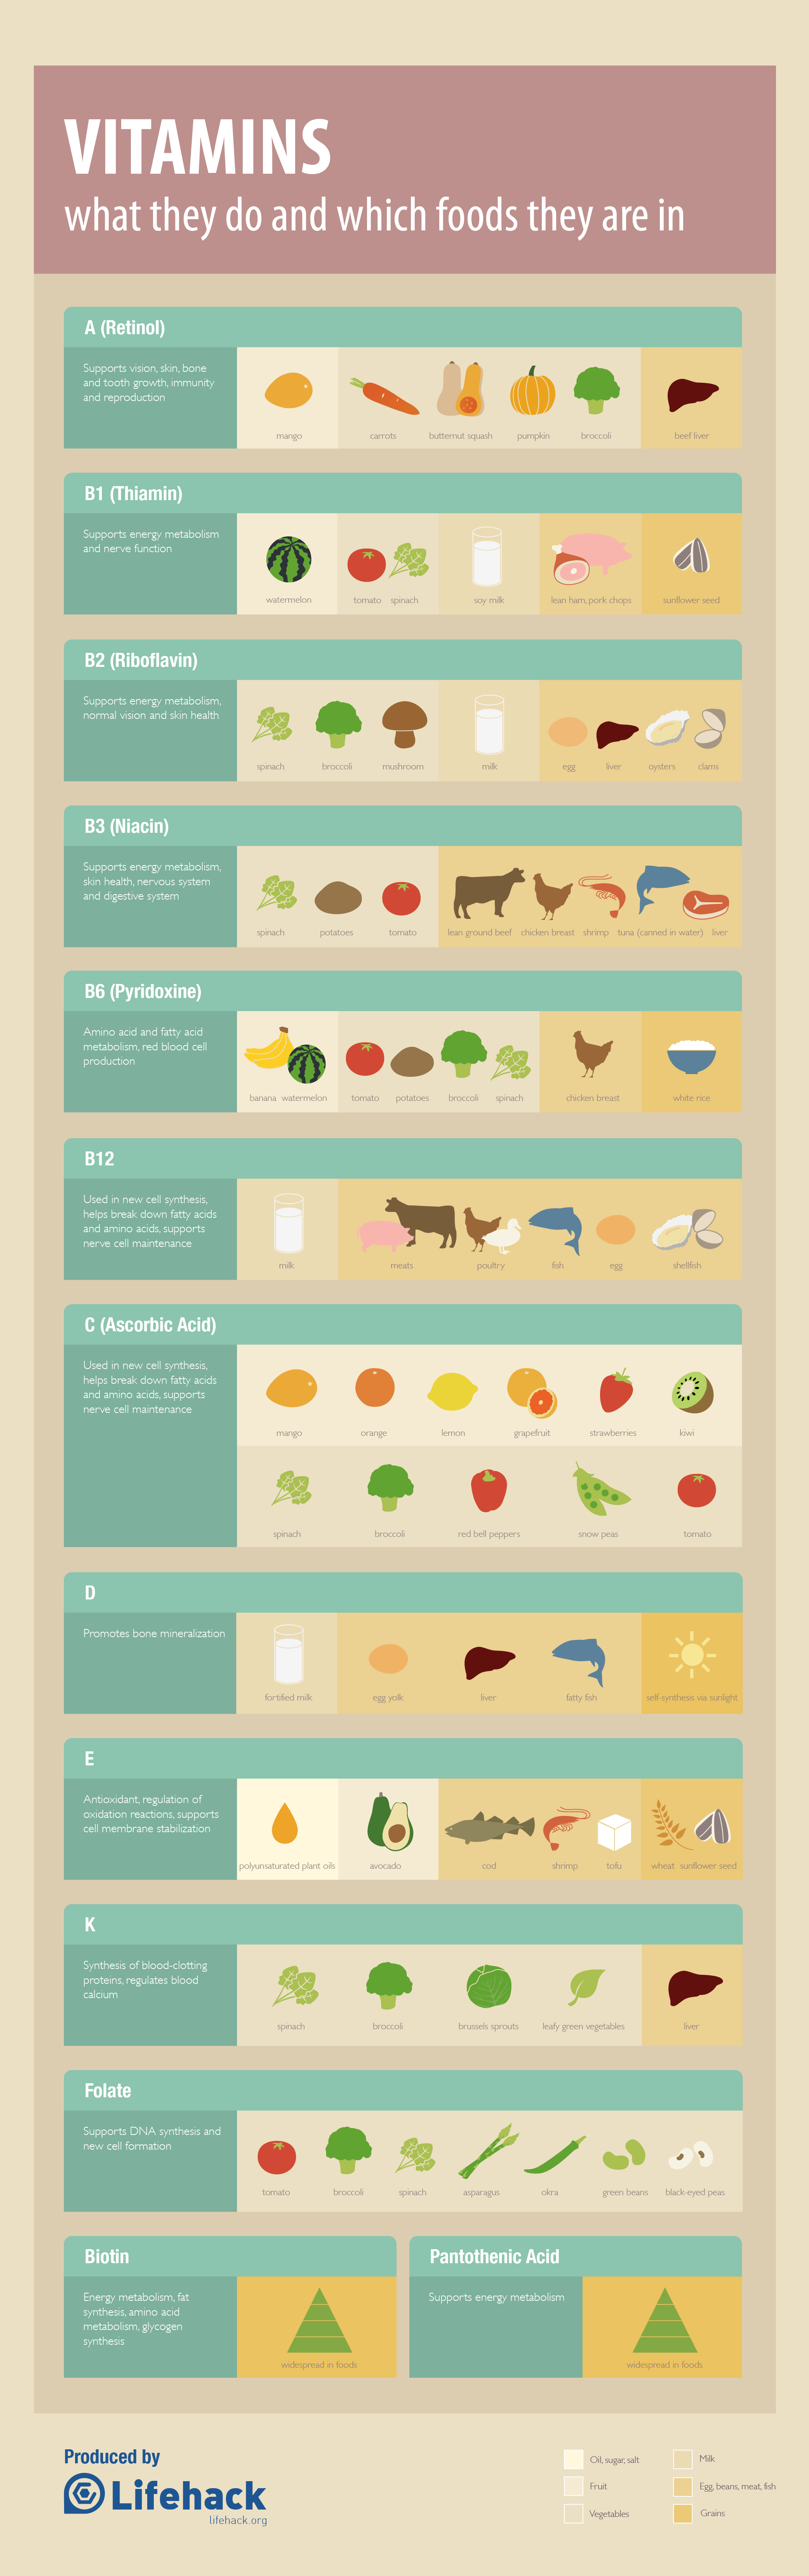 Vitamins Cheat Sheet: What They Do and Good Food Sources [Infographic]